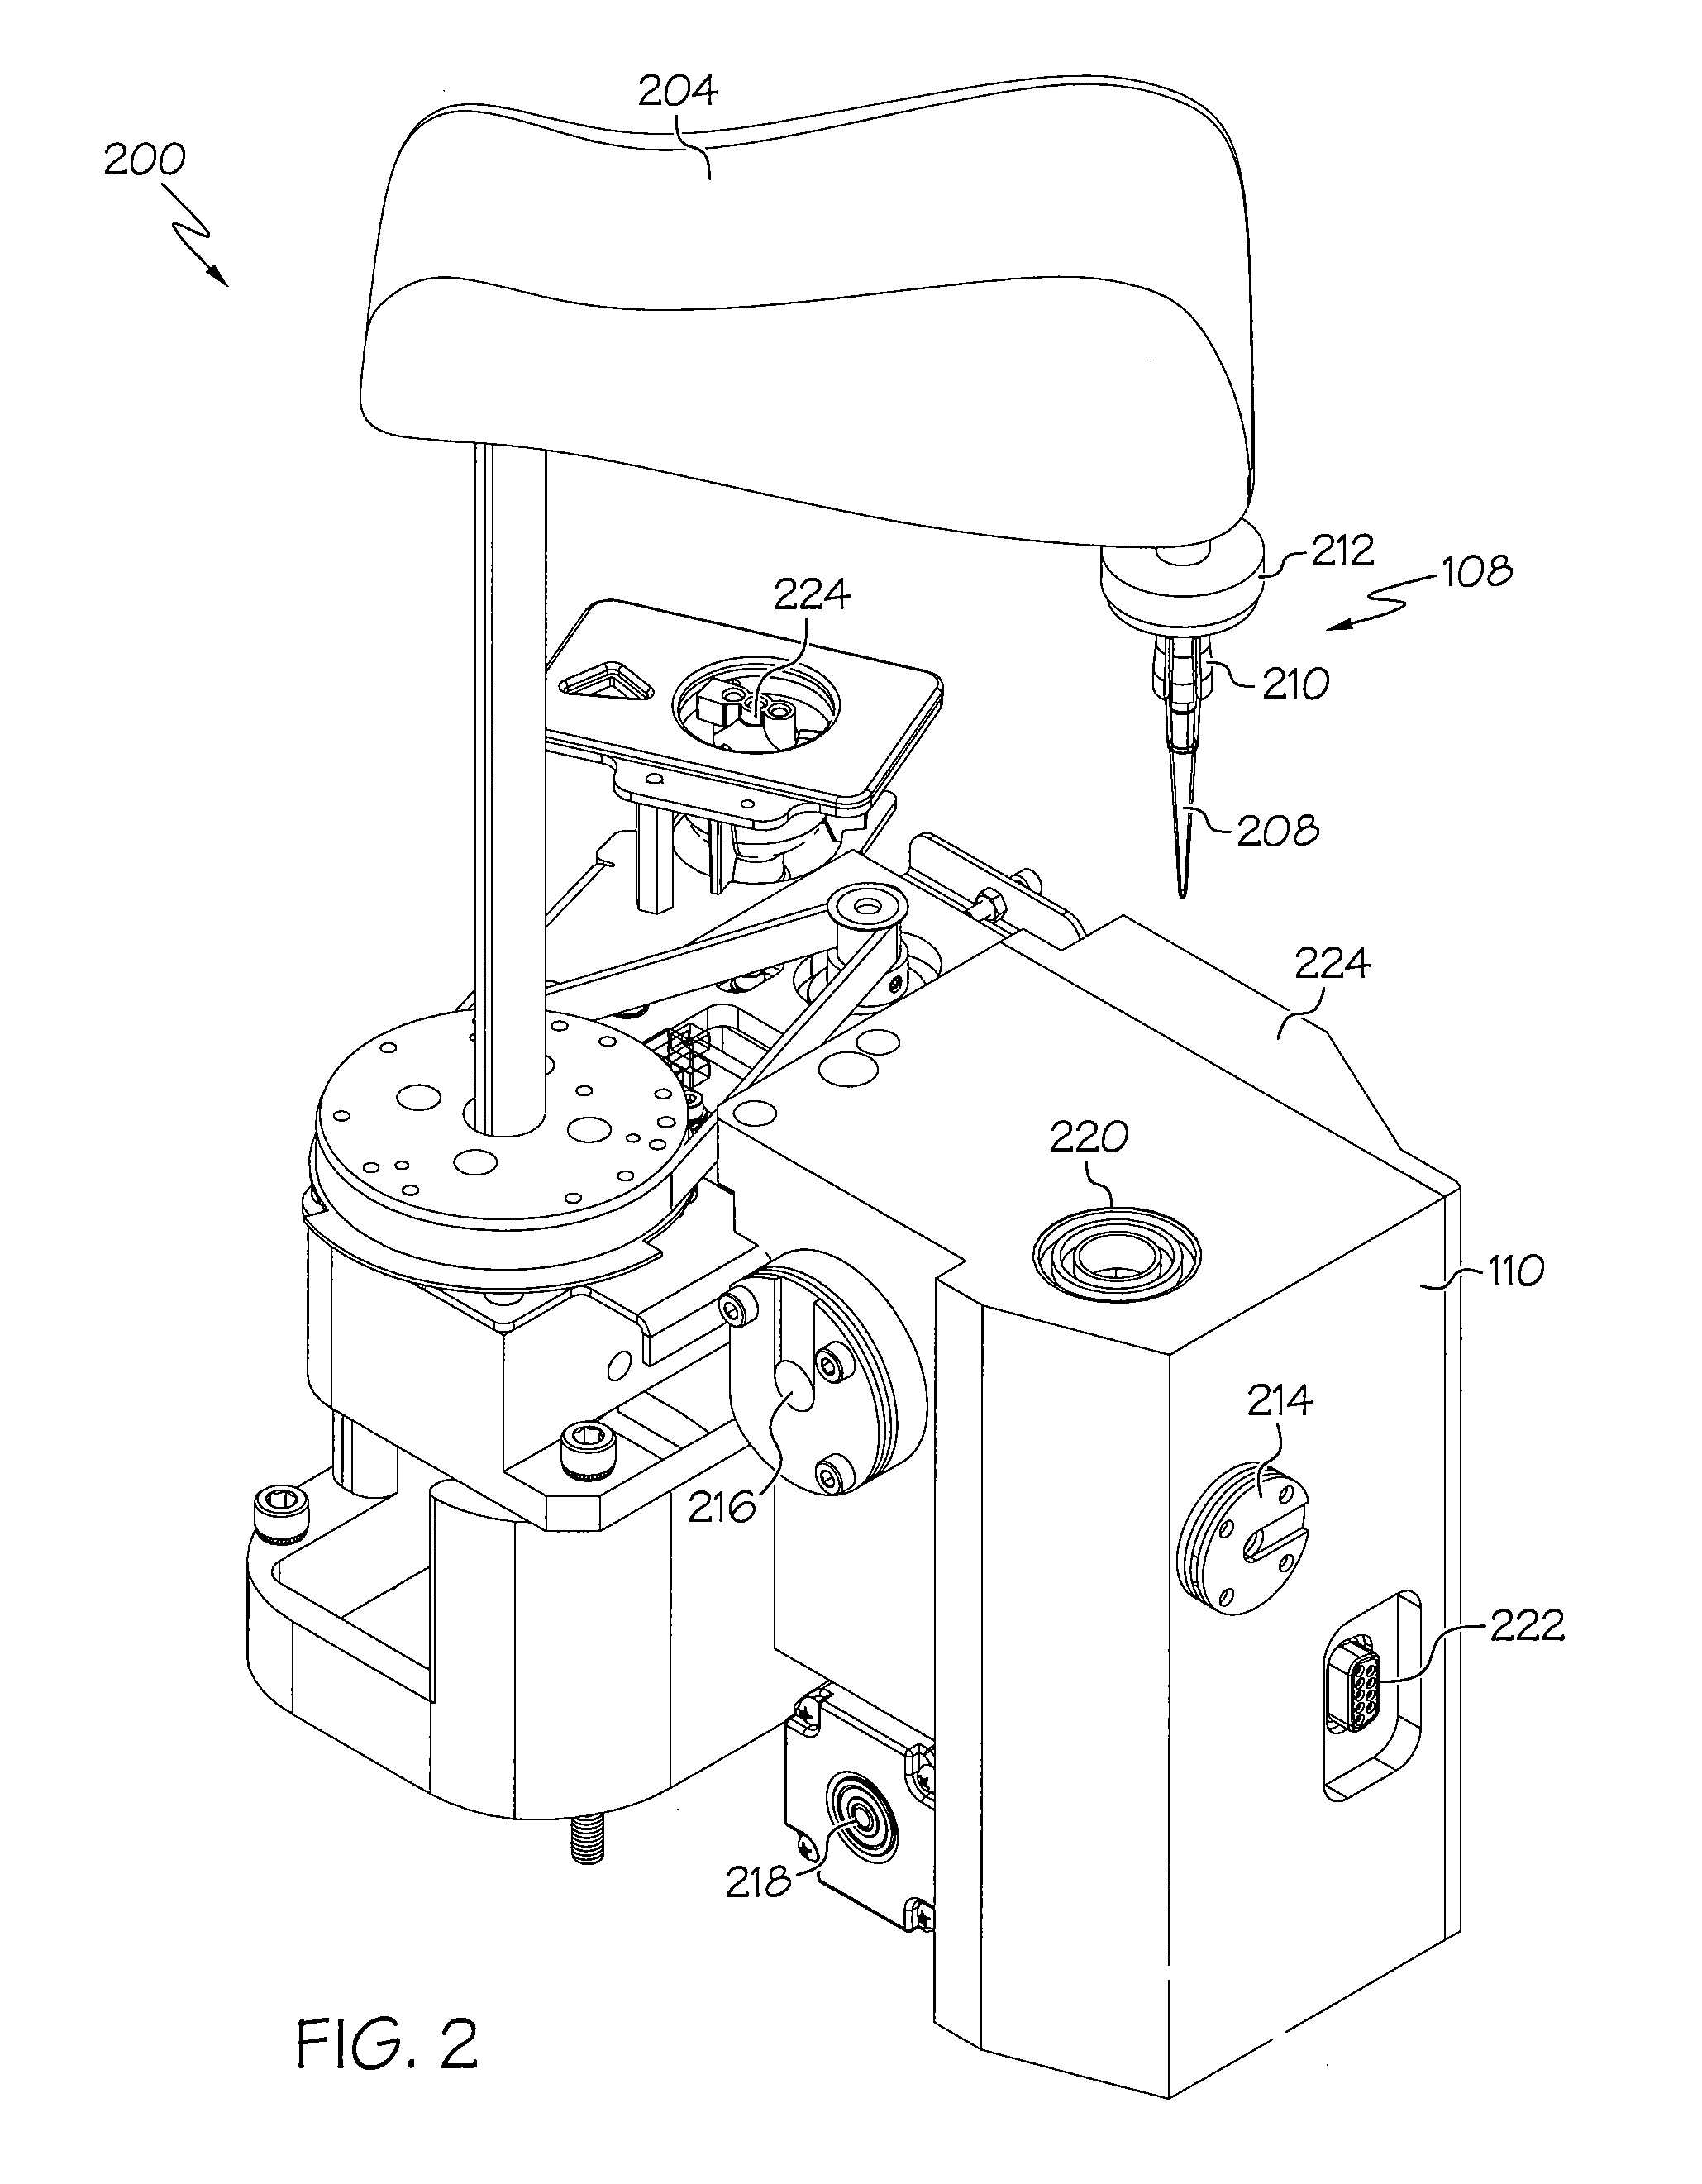 Device and associated methods for performing luminescence and fluorescence measurements of a sample